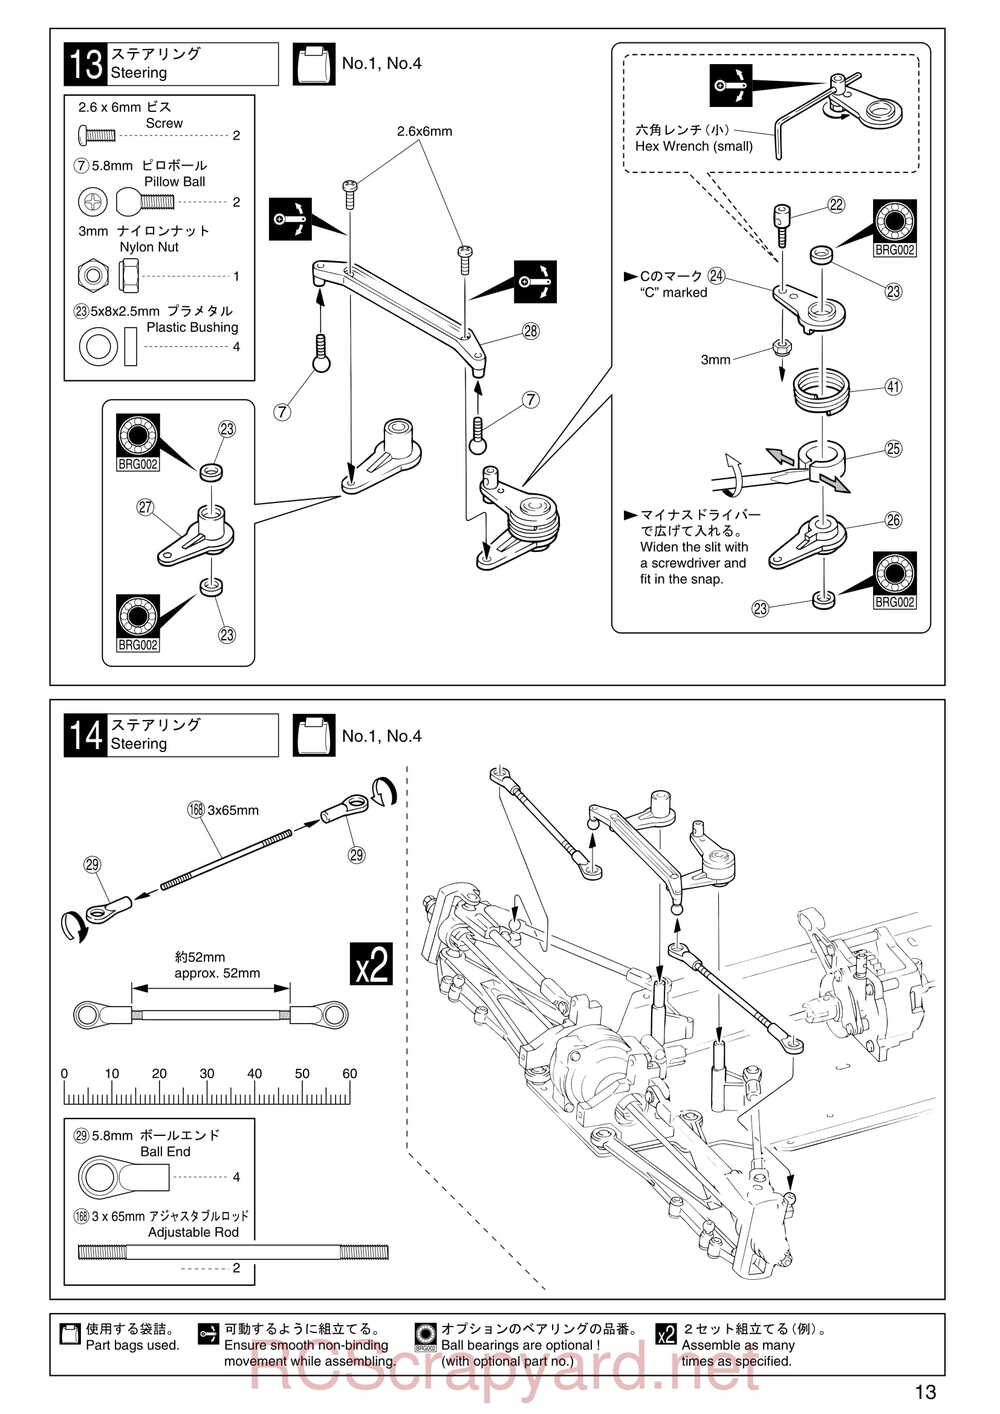 Kyosho - 31213 - TR-15 Monster-Touring - Manual - Page 13